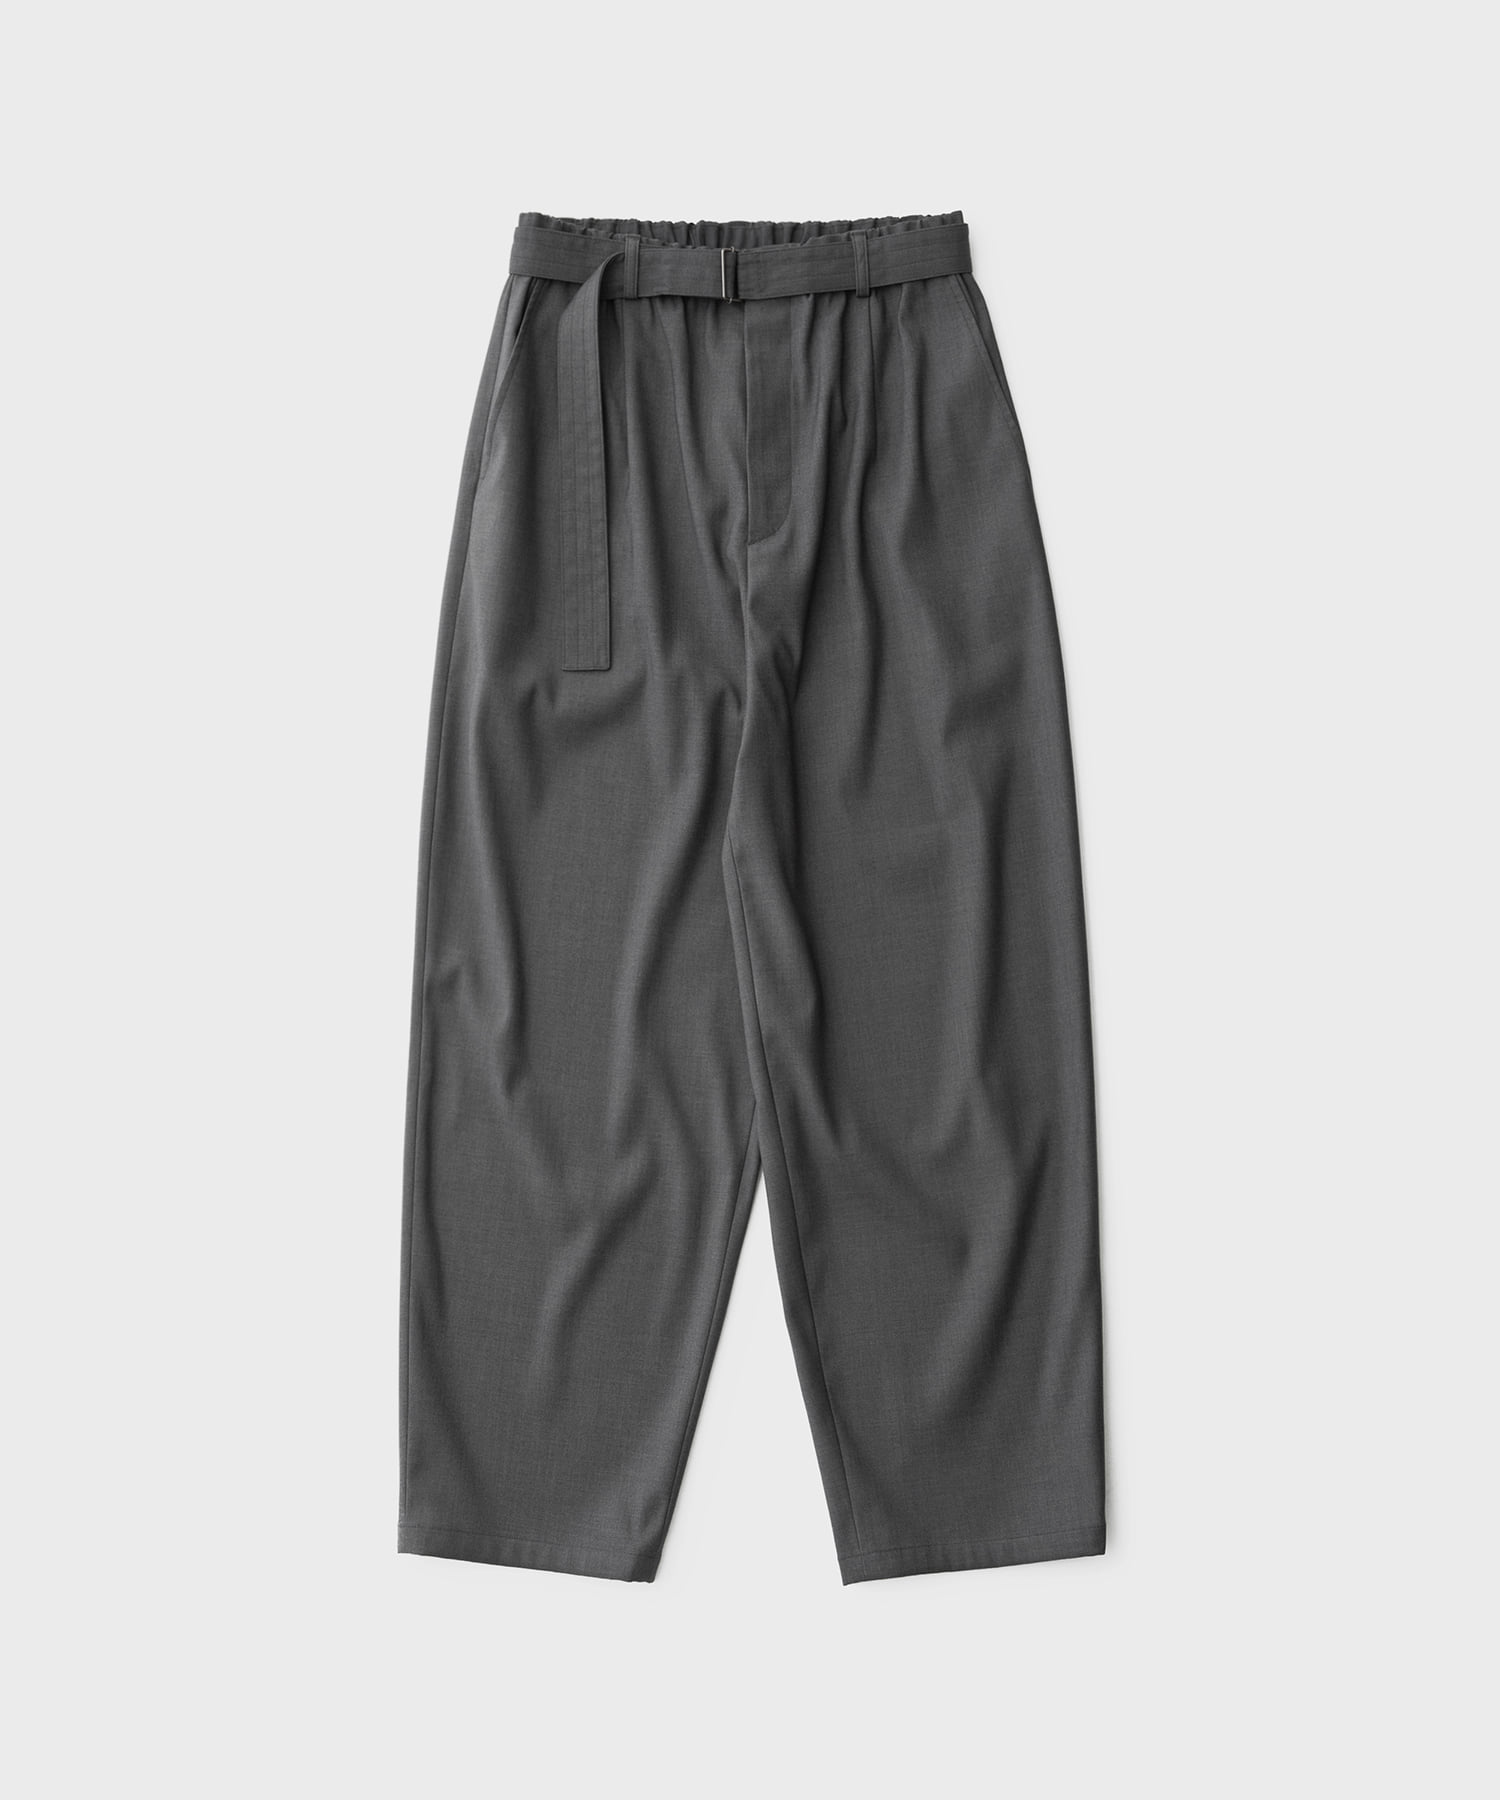 22AW Cocoon Banded Pants (Heather Gray)